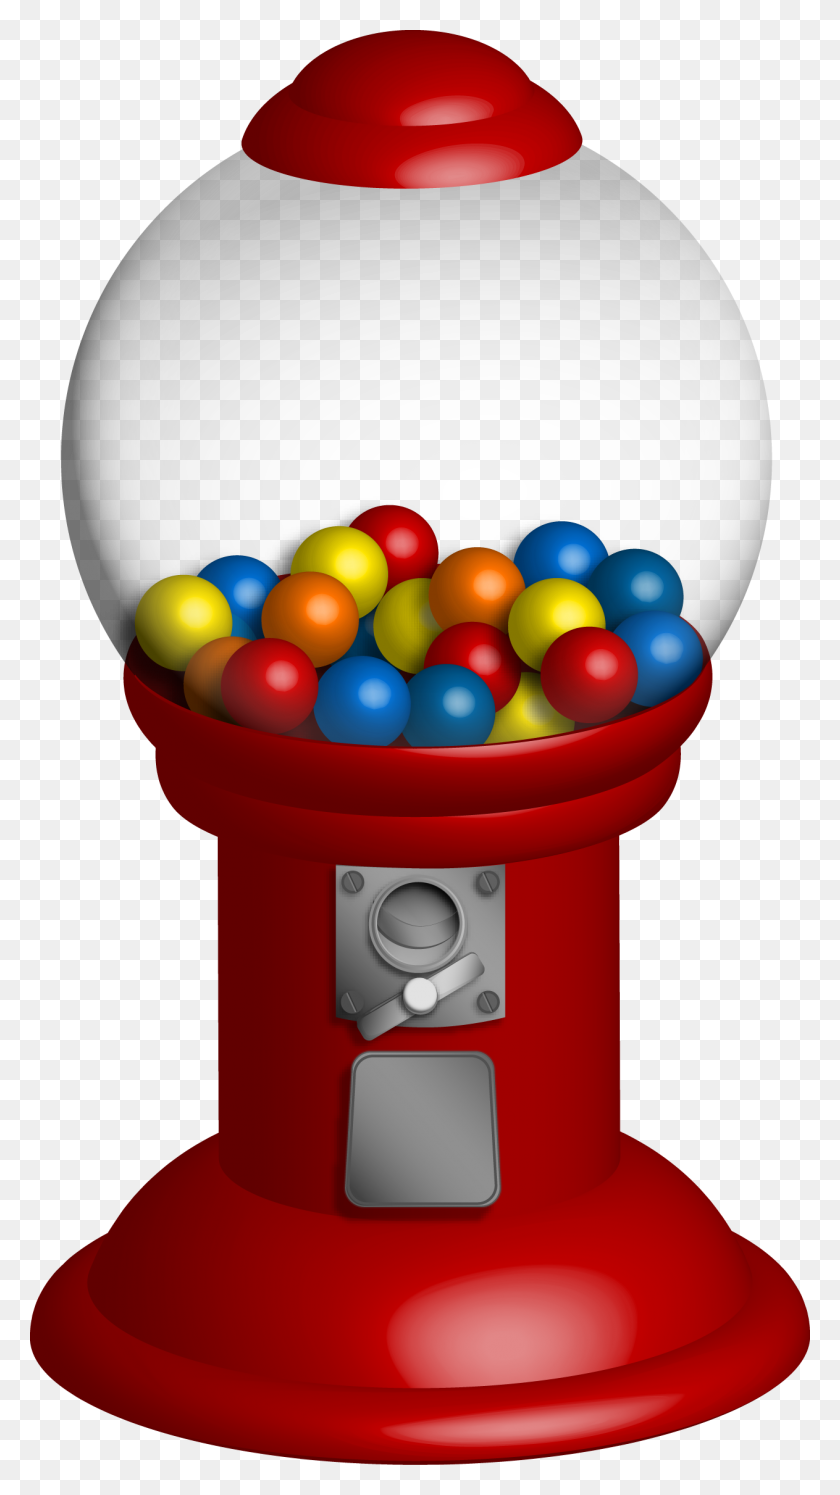 1263x2325 Gumball Machine Picture Huge Freebie! Download For Powerpoint - Bubble Gum Clipart